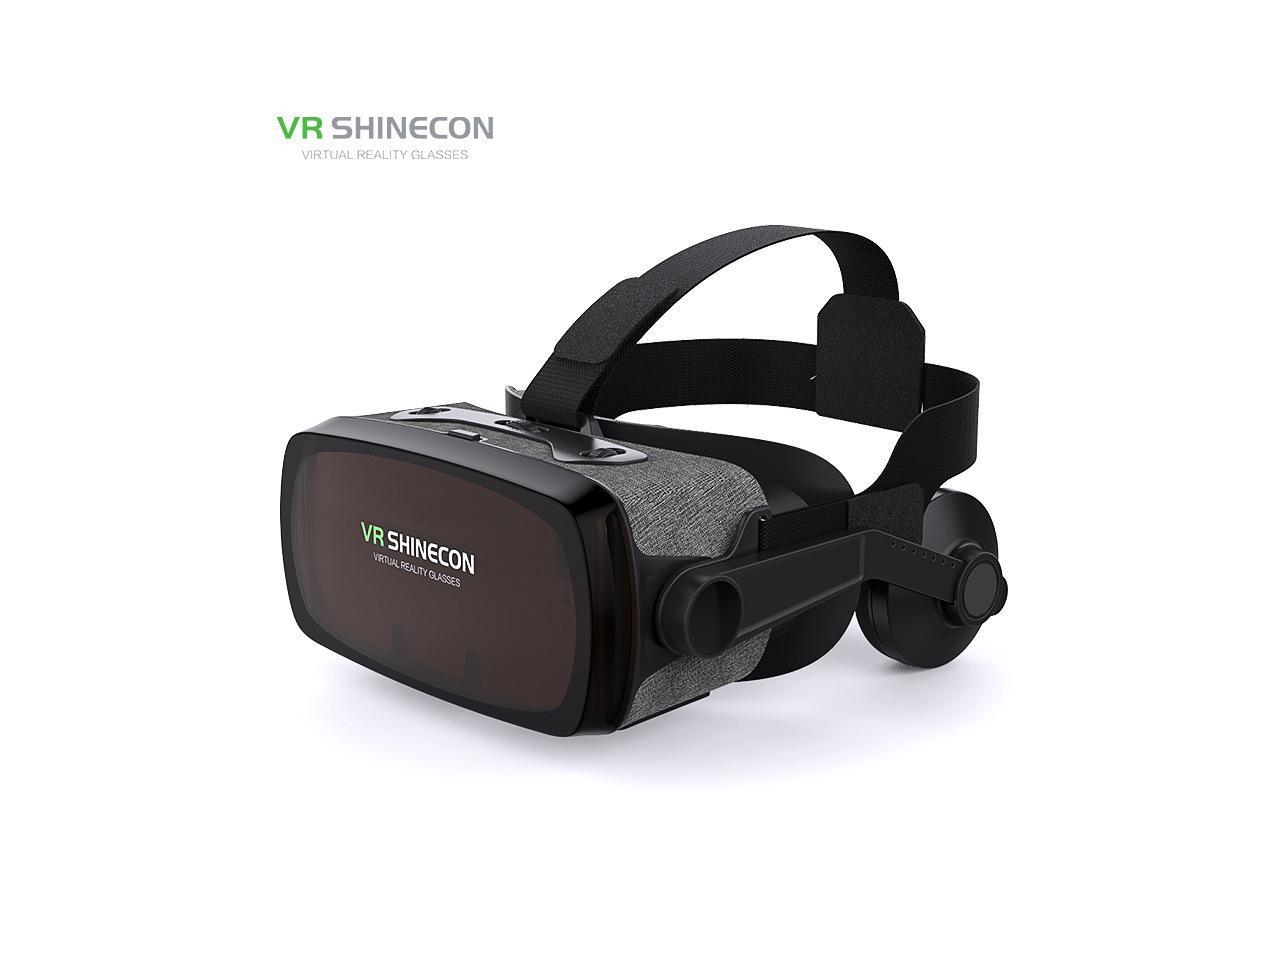 VRSHINECON-G07E 3D VR Headset Virtual Reality Glasses for 3D Movies & VR Games with Stereo Headphones, Adjustable Lenses & Head Straps - Compatible with 4.7